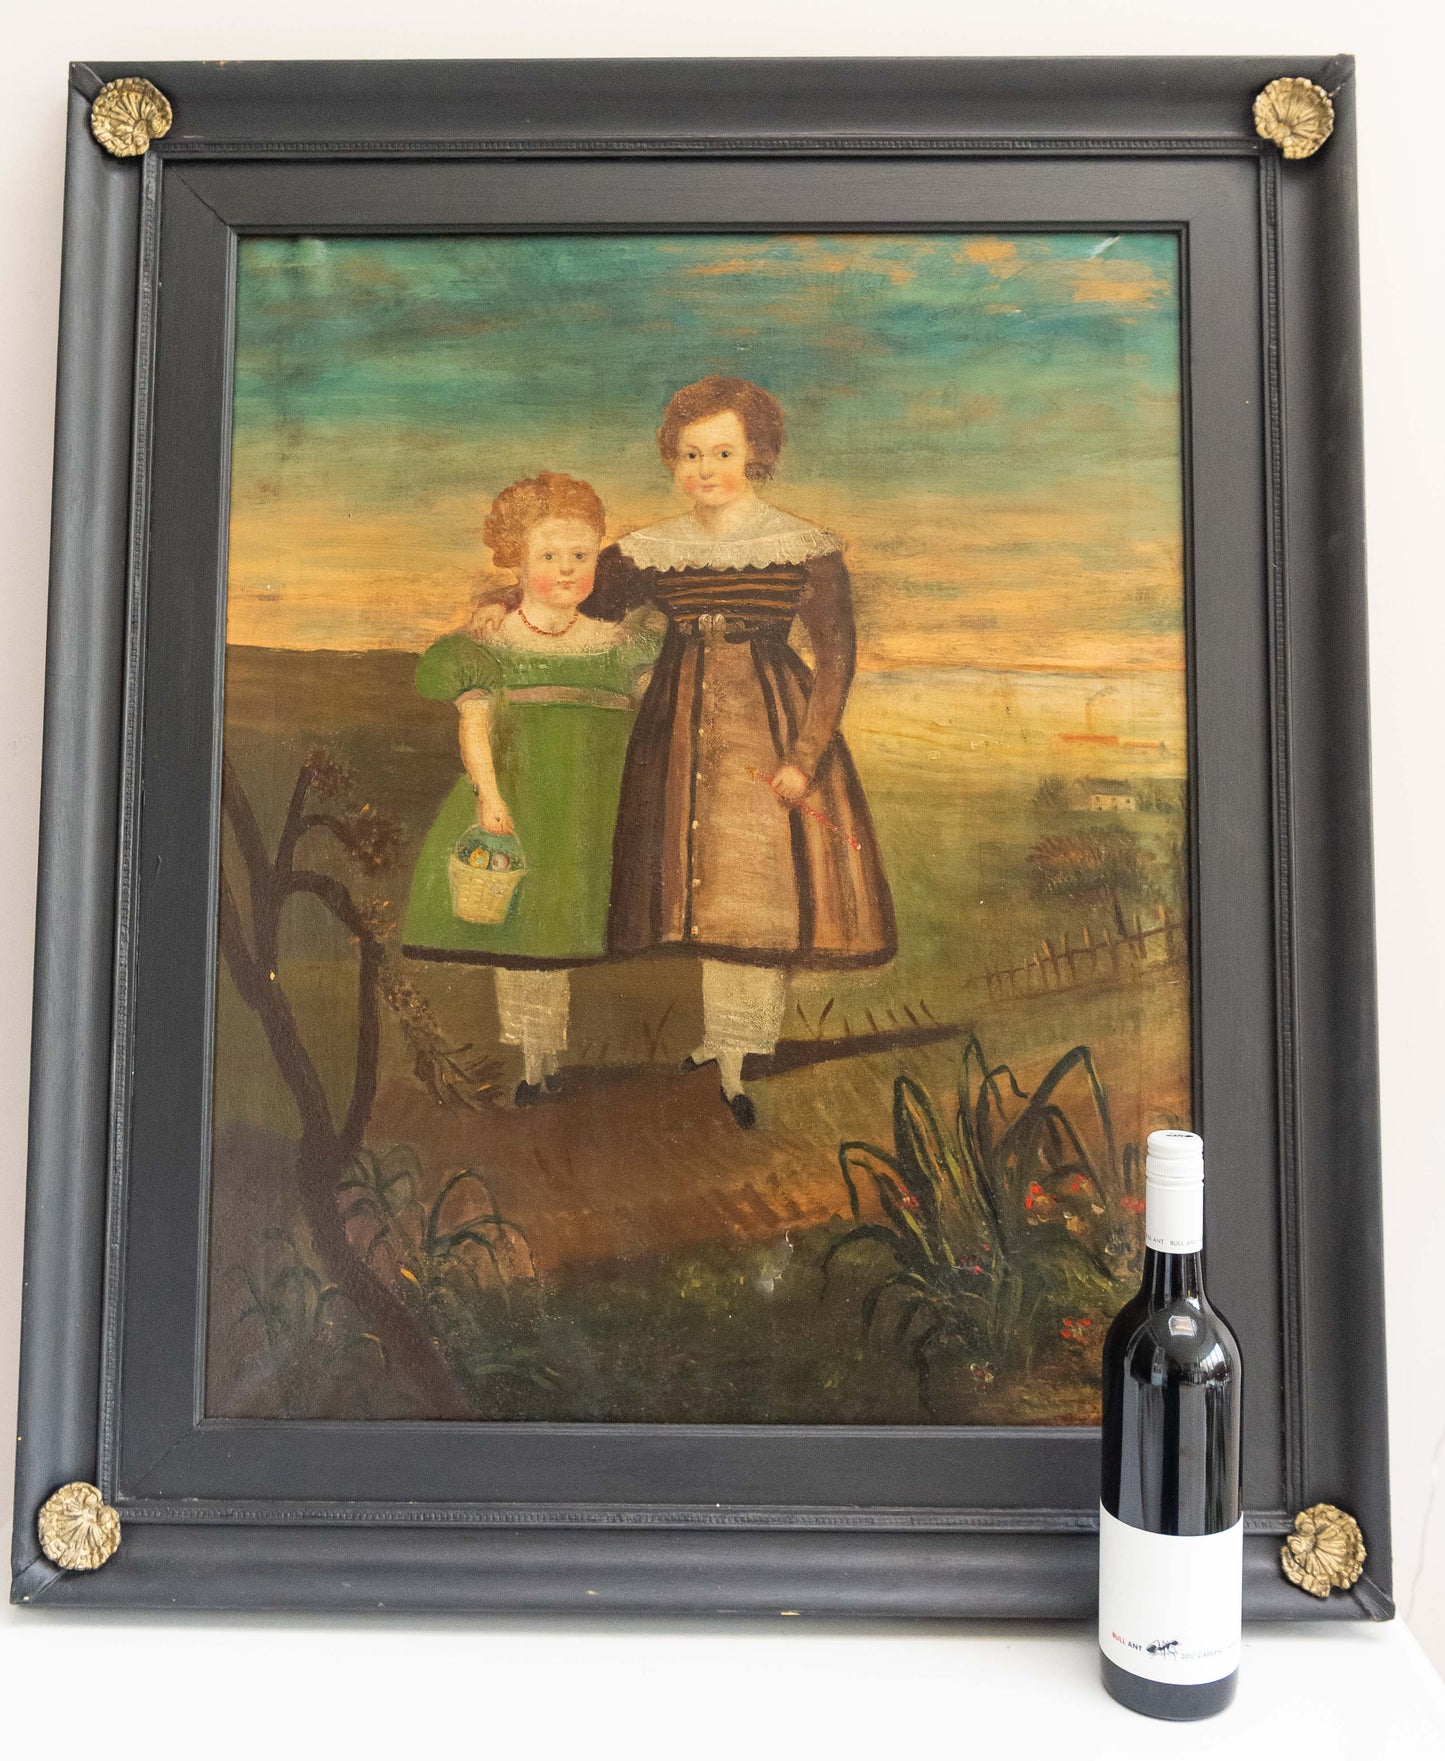 Large 19th century naive oil on canvas of two children standing in a landscape.